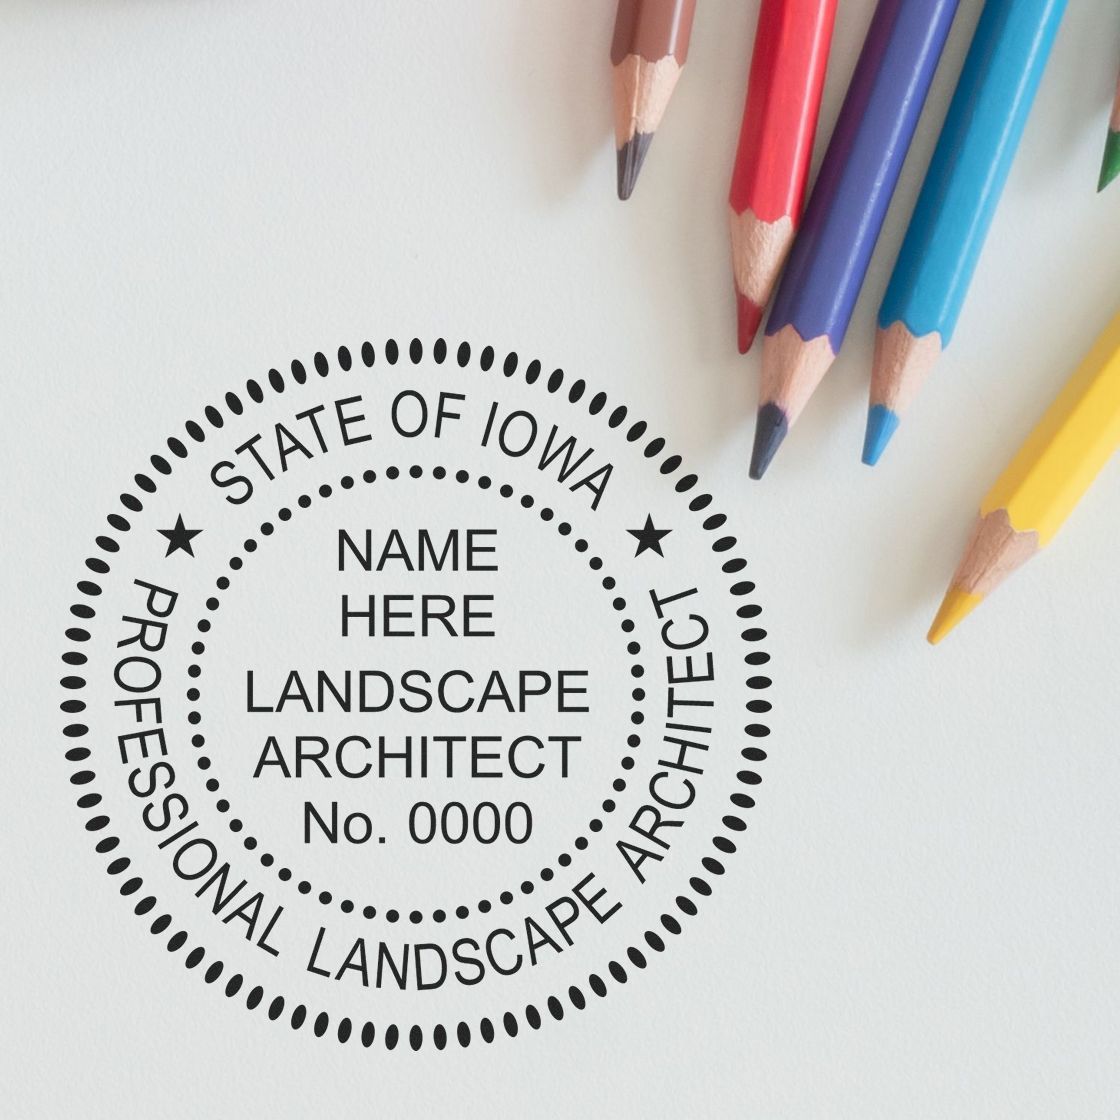 This paper is stamped with a sample imprint of the Slim Pre-Inked Iowa Landscape Architect Seal Stamp, signifying its quality and reliability.